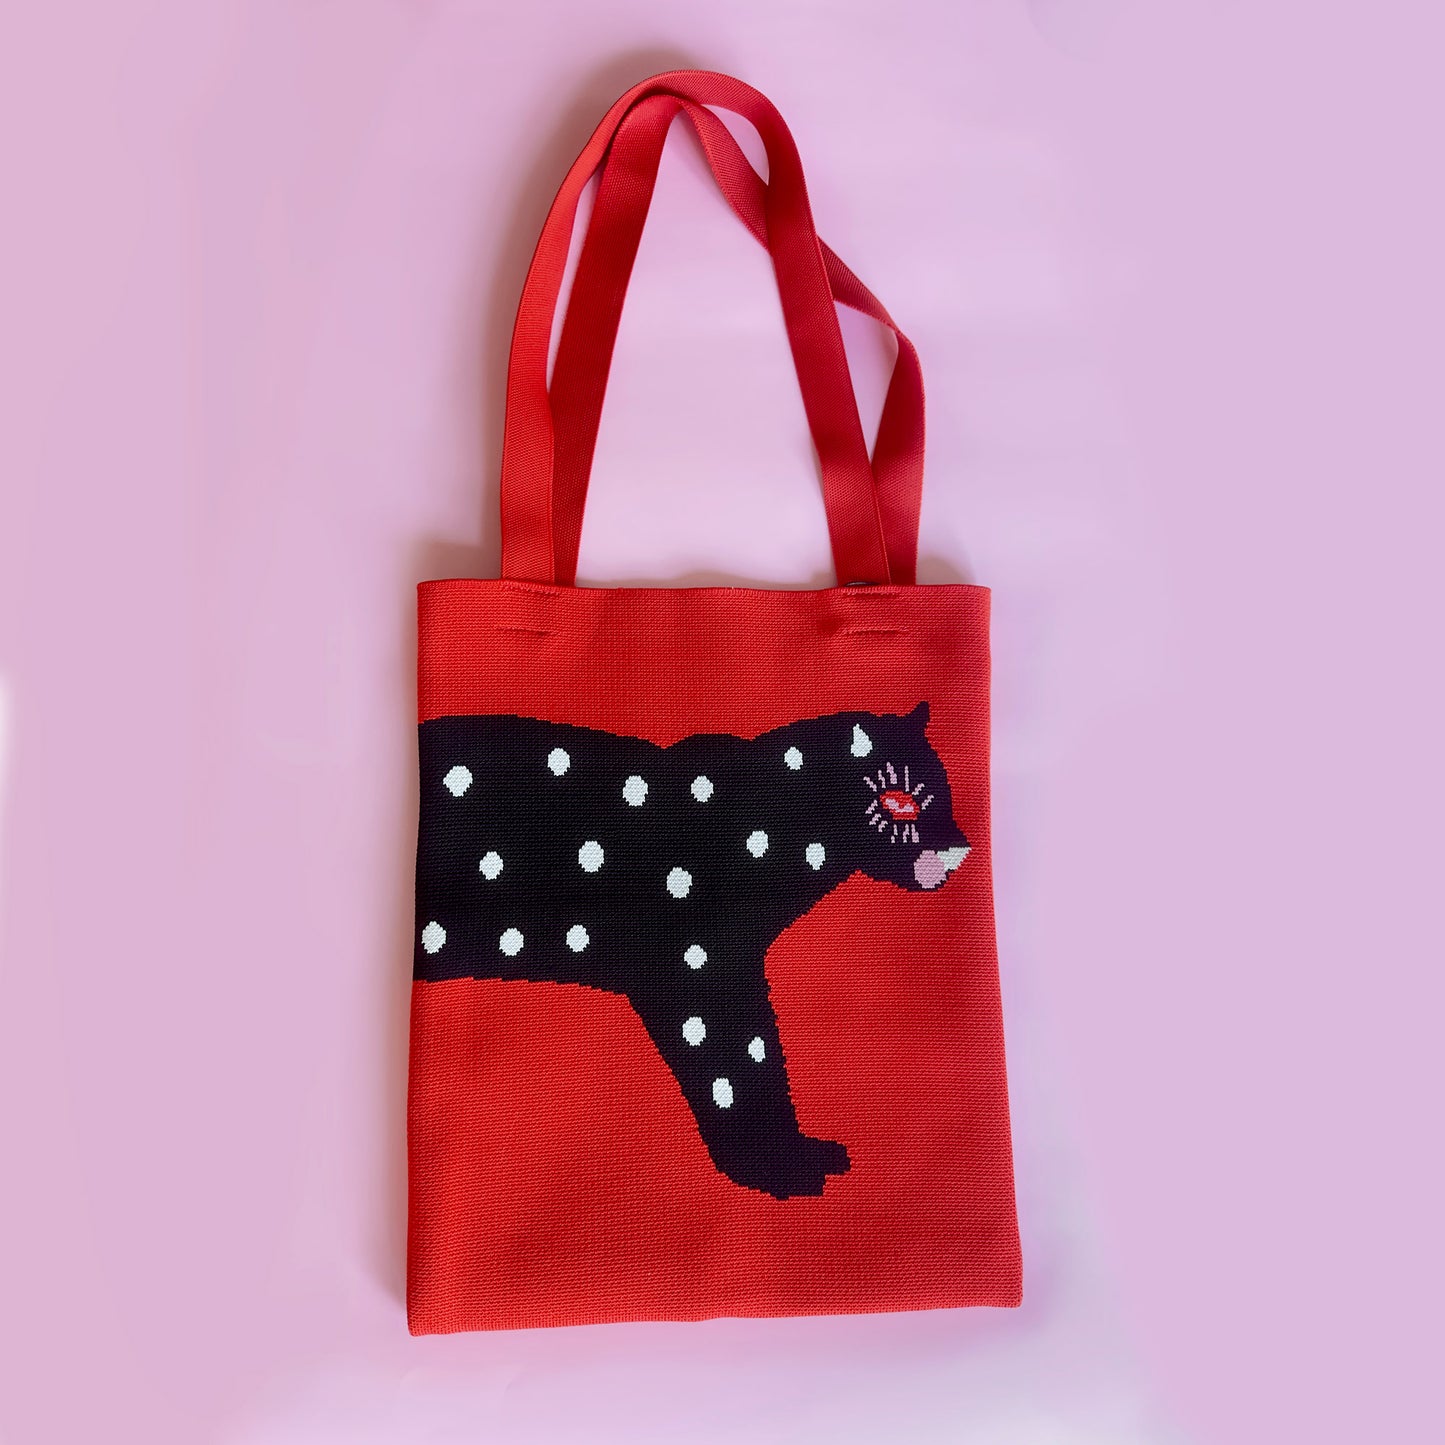 Polka cat with polka dots knit tote bag in red and black.